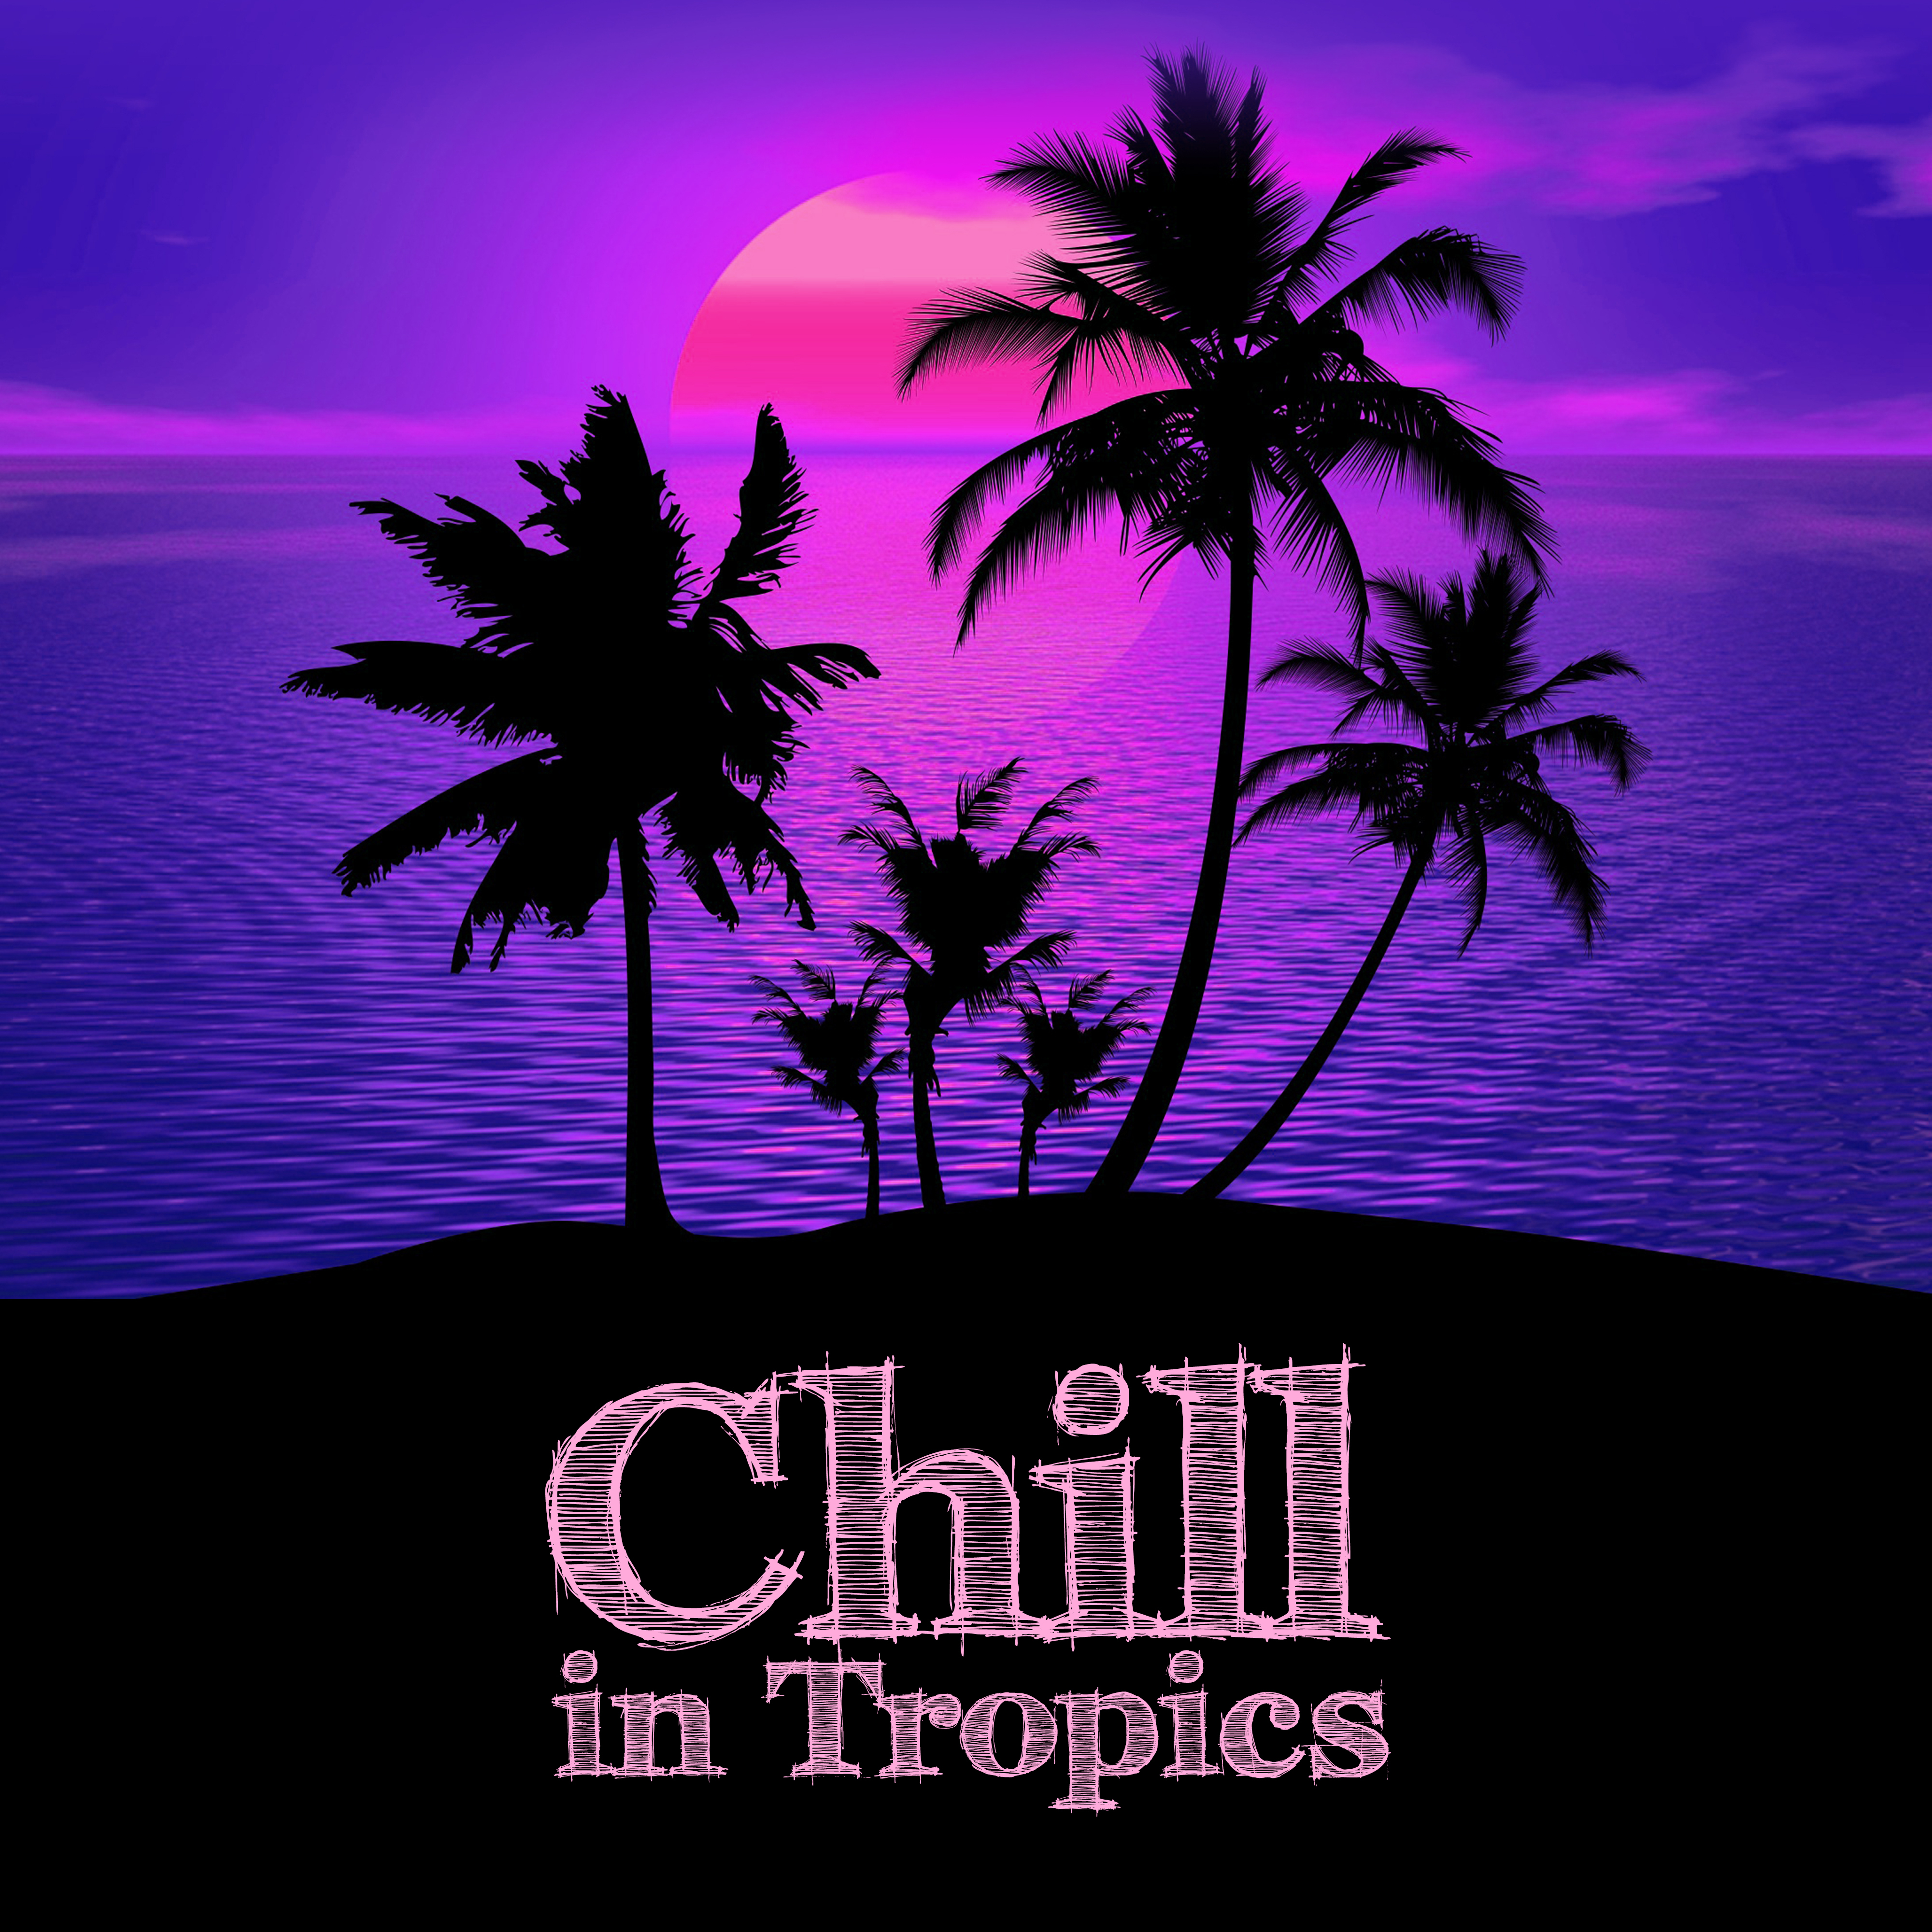 Chill in Tropics – Summer Vibes, Relax Under Palms, Beach Party, Deep Relax, Tropical Lounge Music, Chill House